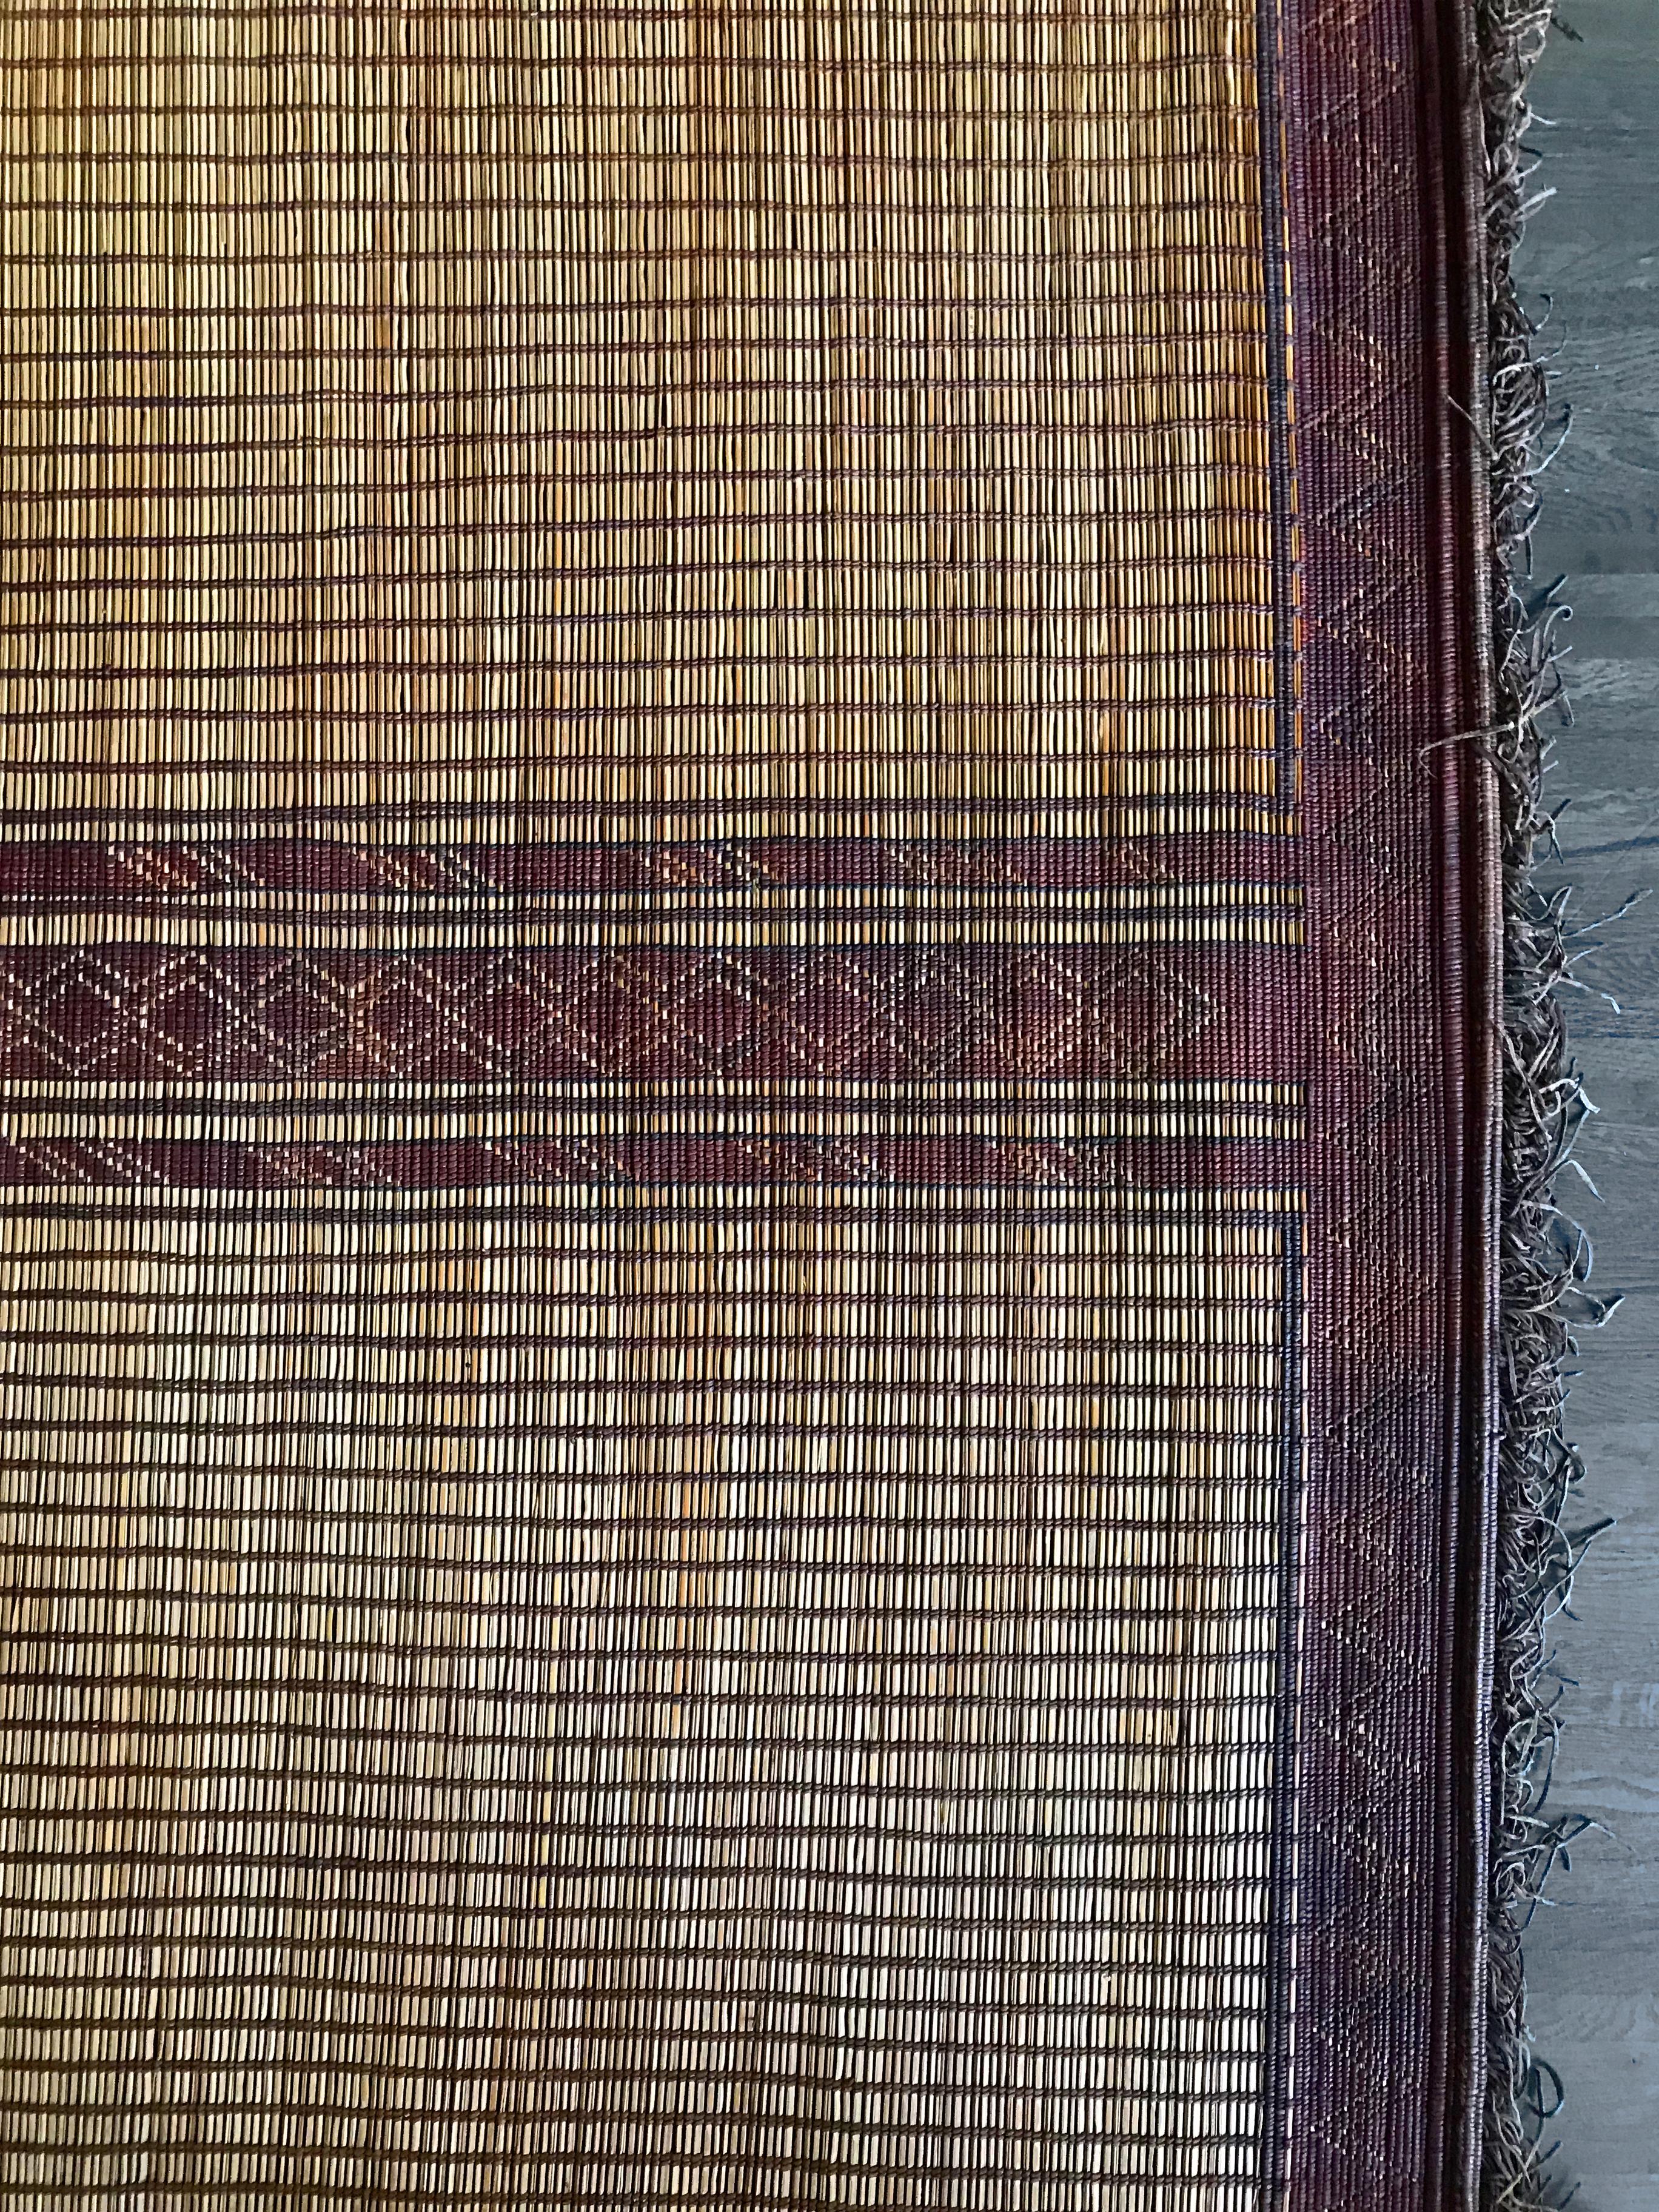 Mauritania Mat from Sahara in Leather and Palm Wood, Mid-Century Modern Design For Sale 1